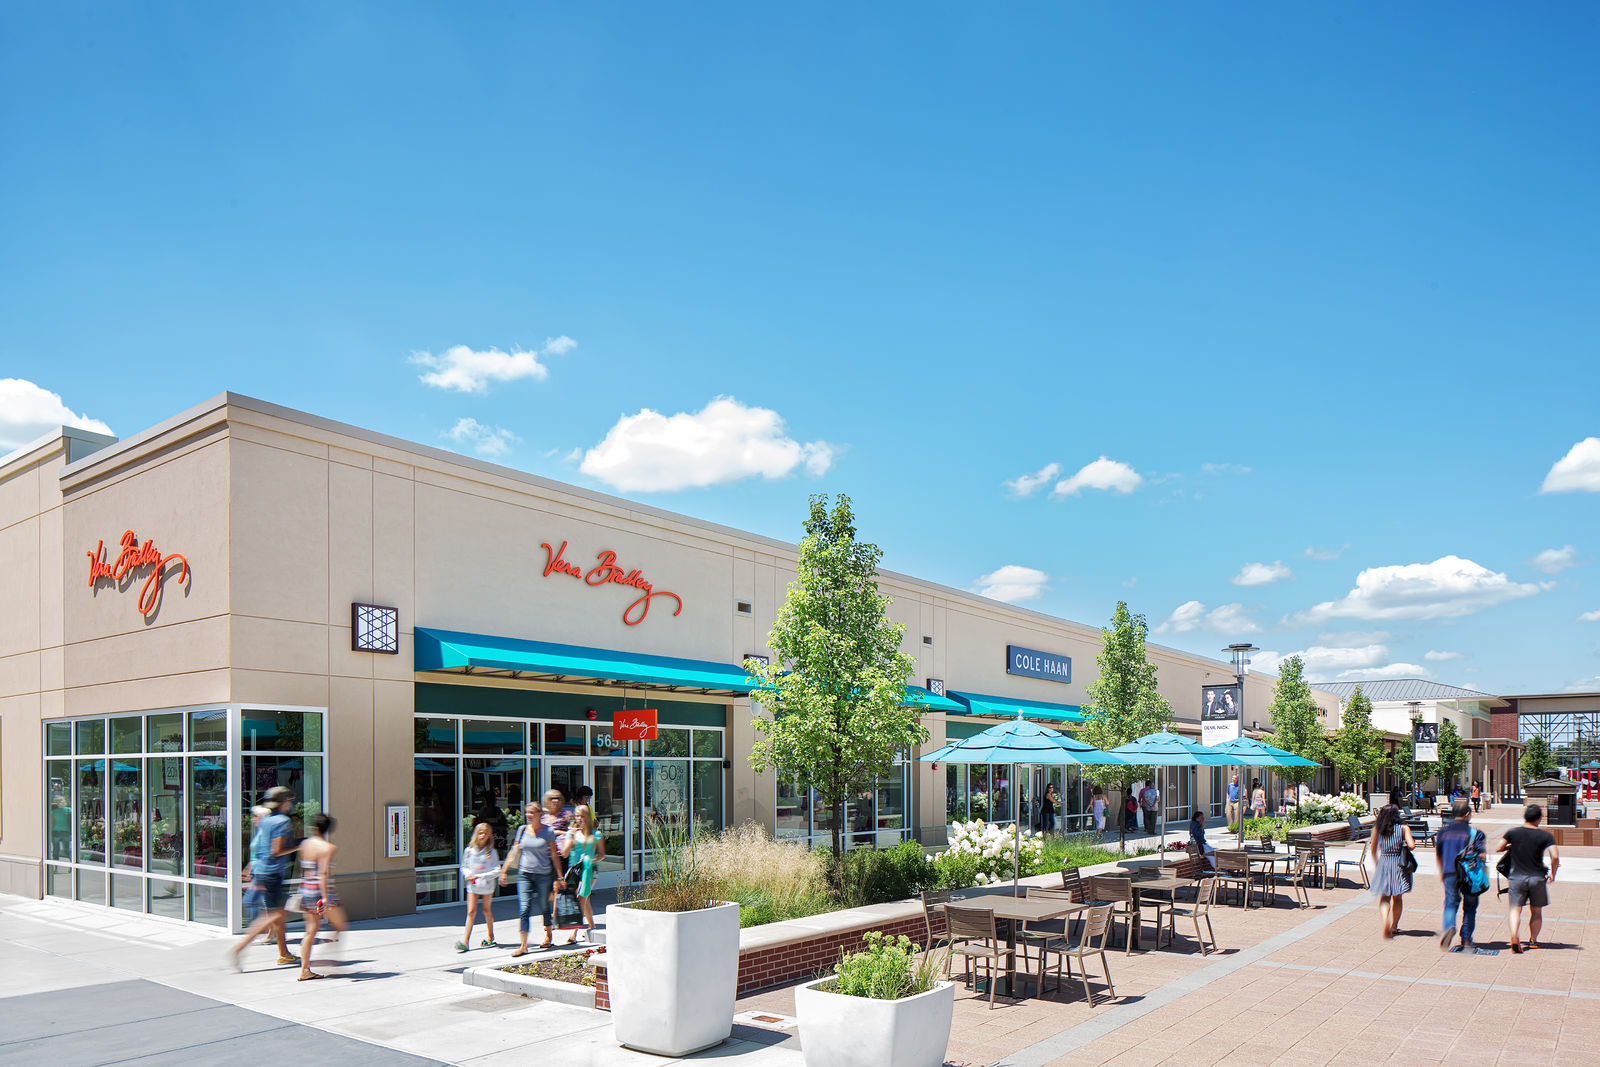 Outlet centre in Aurora, IL - Chicago Premium Outlets - 167 stores